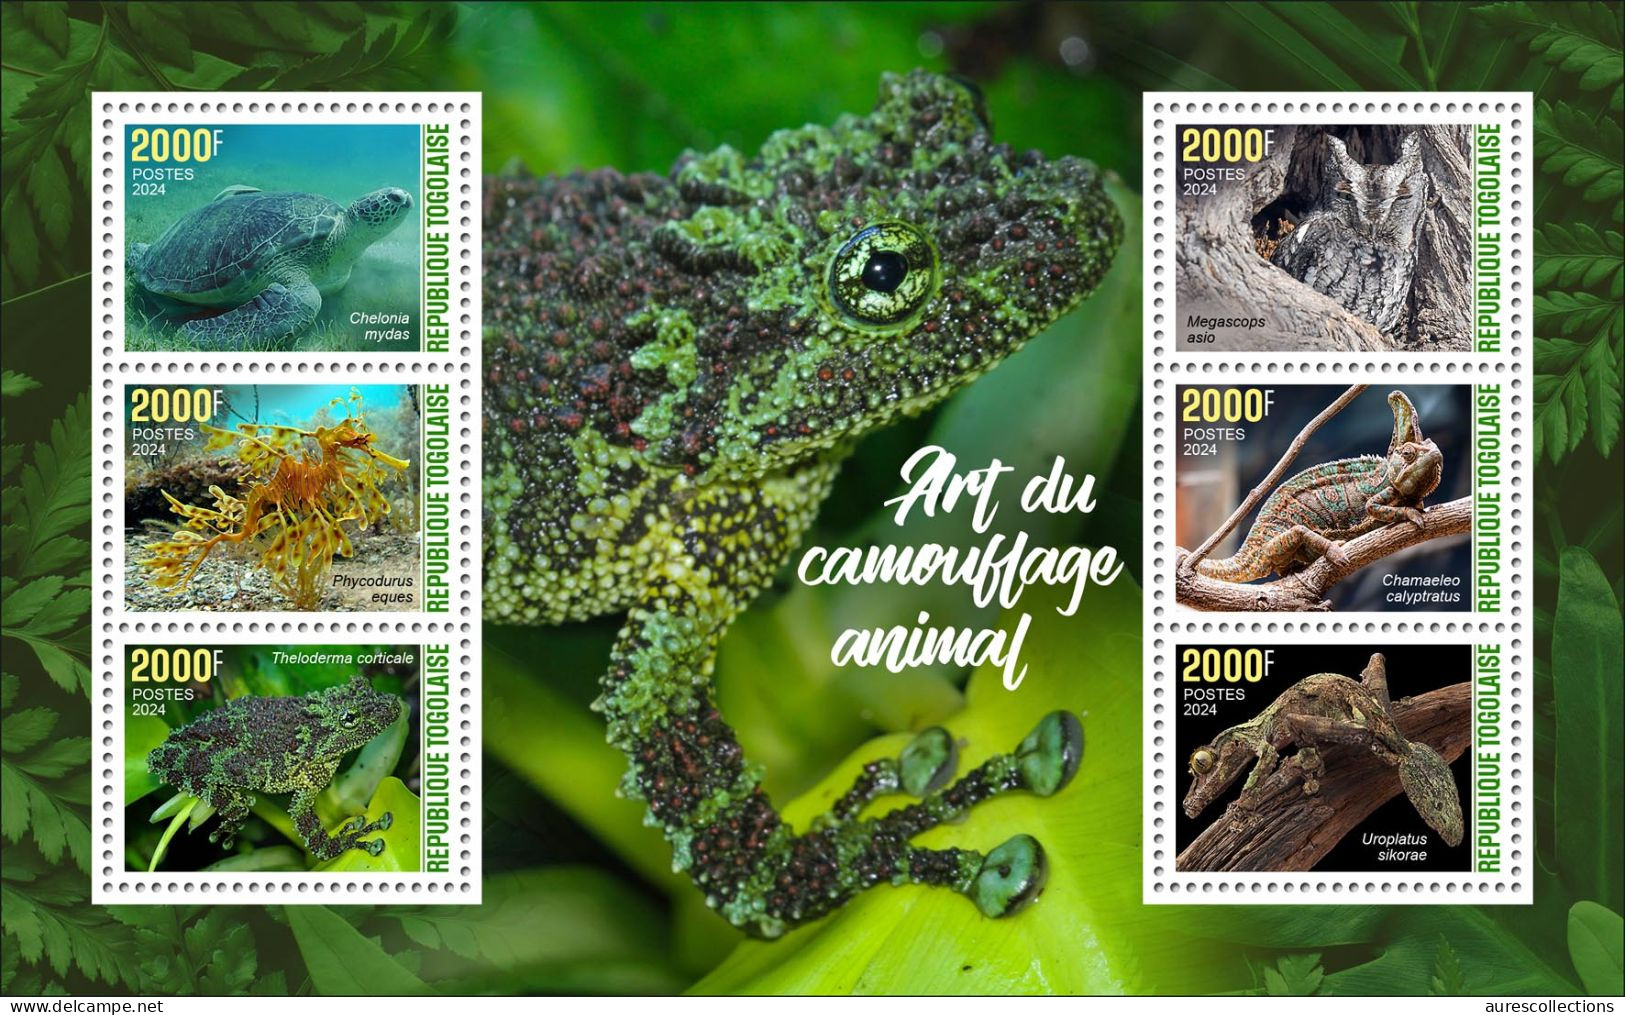 TOGO 2024 MS 6V - CAMOUFLAGE - FROG FROGS TURTLES TURTLE OWL OWLS GECKO CHAMELEON SEAHORSE HIPPOCAMPE REPTILES - MNH - Frogs